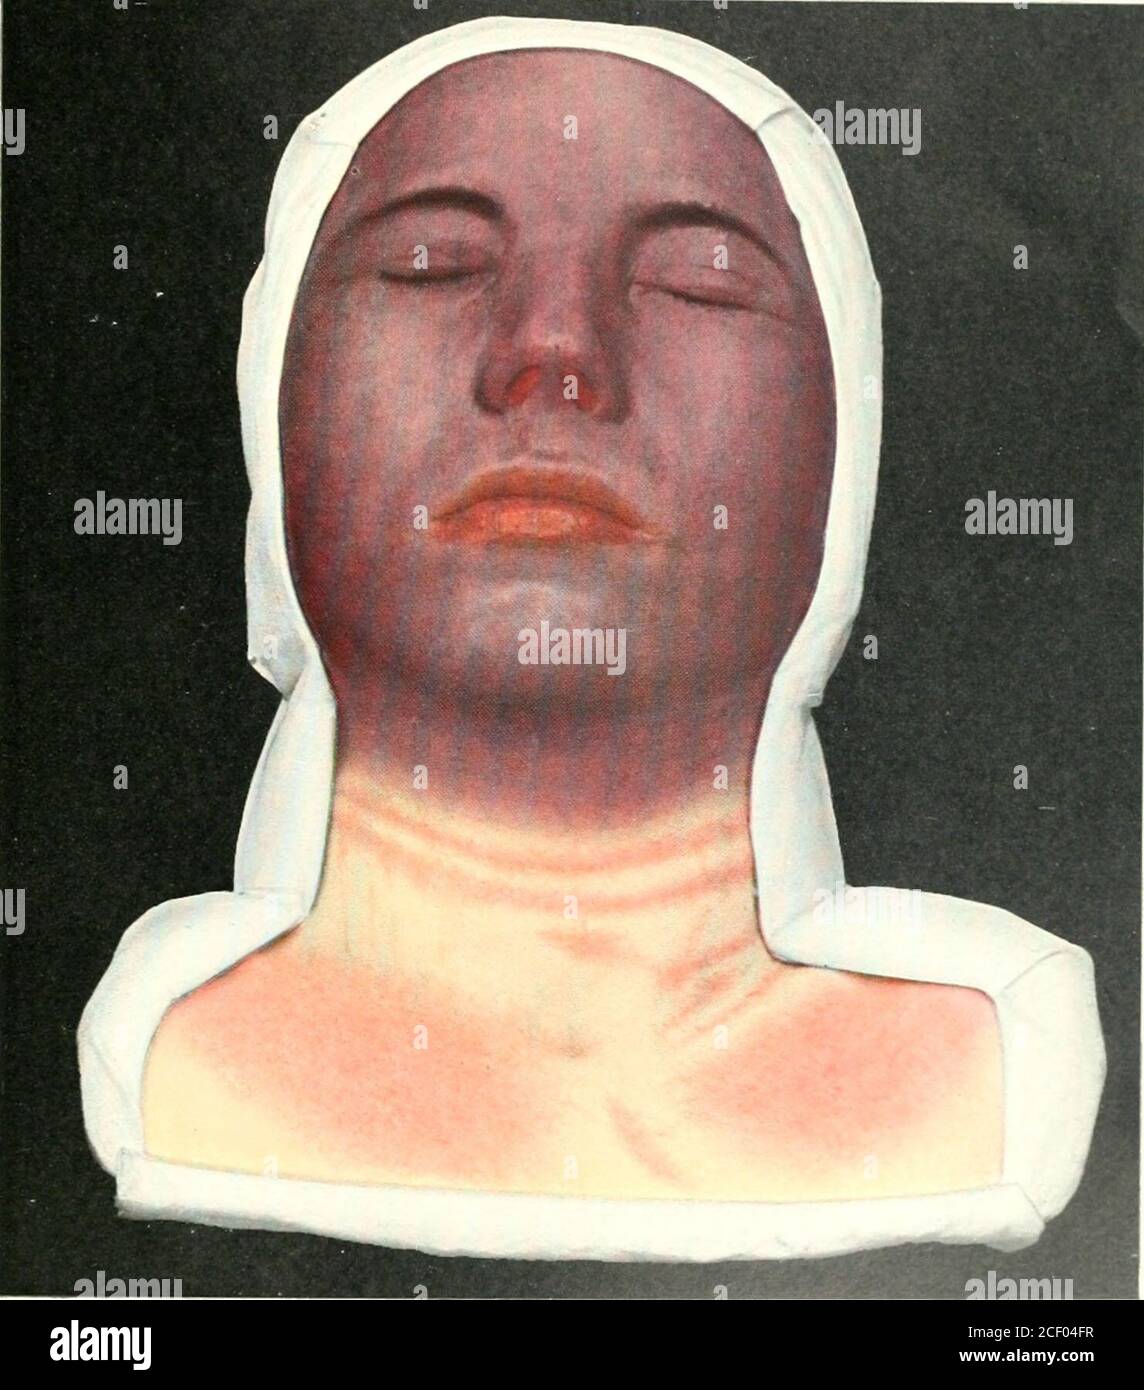 . Atlas of clinical surgery; with special reference to diagnosis and treatment for practitioners and students. in criminal and accident cases in whichthere is no visible lesion of the abdomen. The sud-den appearance of this extensive hemorrhage in thehead and neck causes a dark-blue coloration of theskin, protrusion of the eyes, and a swollen andbloated appearance of the skin and mucous mem-branes. It occurs in cases of crush, run-over cases,and compression by machinery, and is due to backpressure on the valveless veins of the neck from com-pression of the thorax and abdomen, with rupture ofth Stock Photo